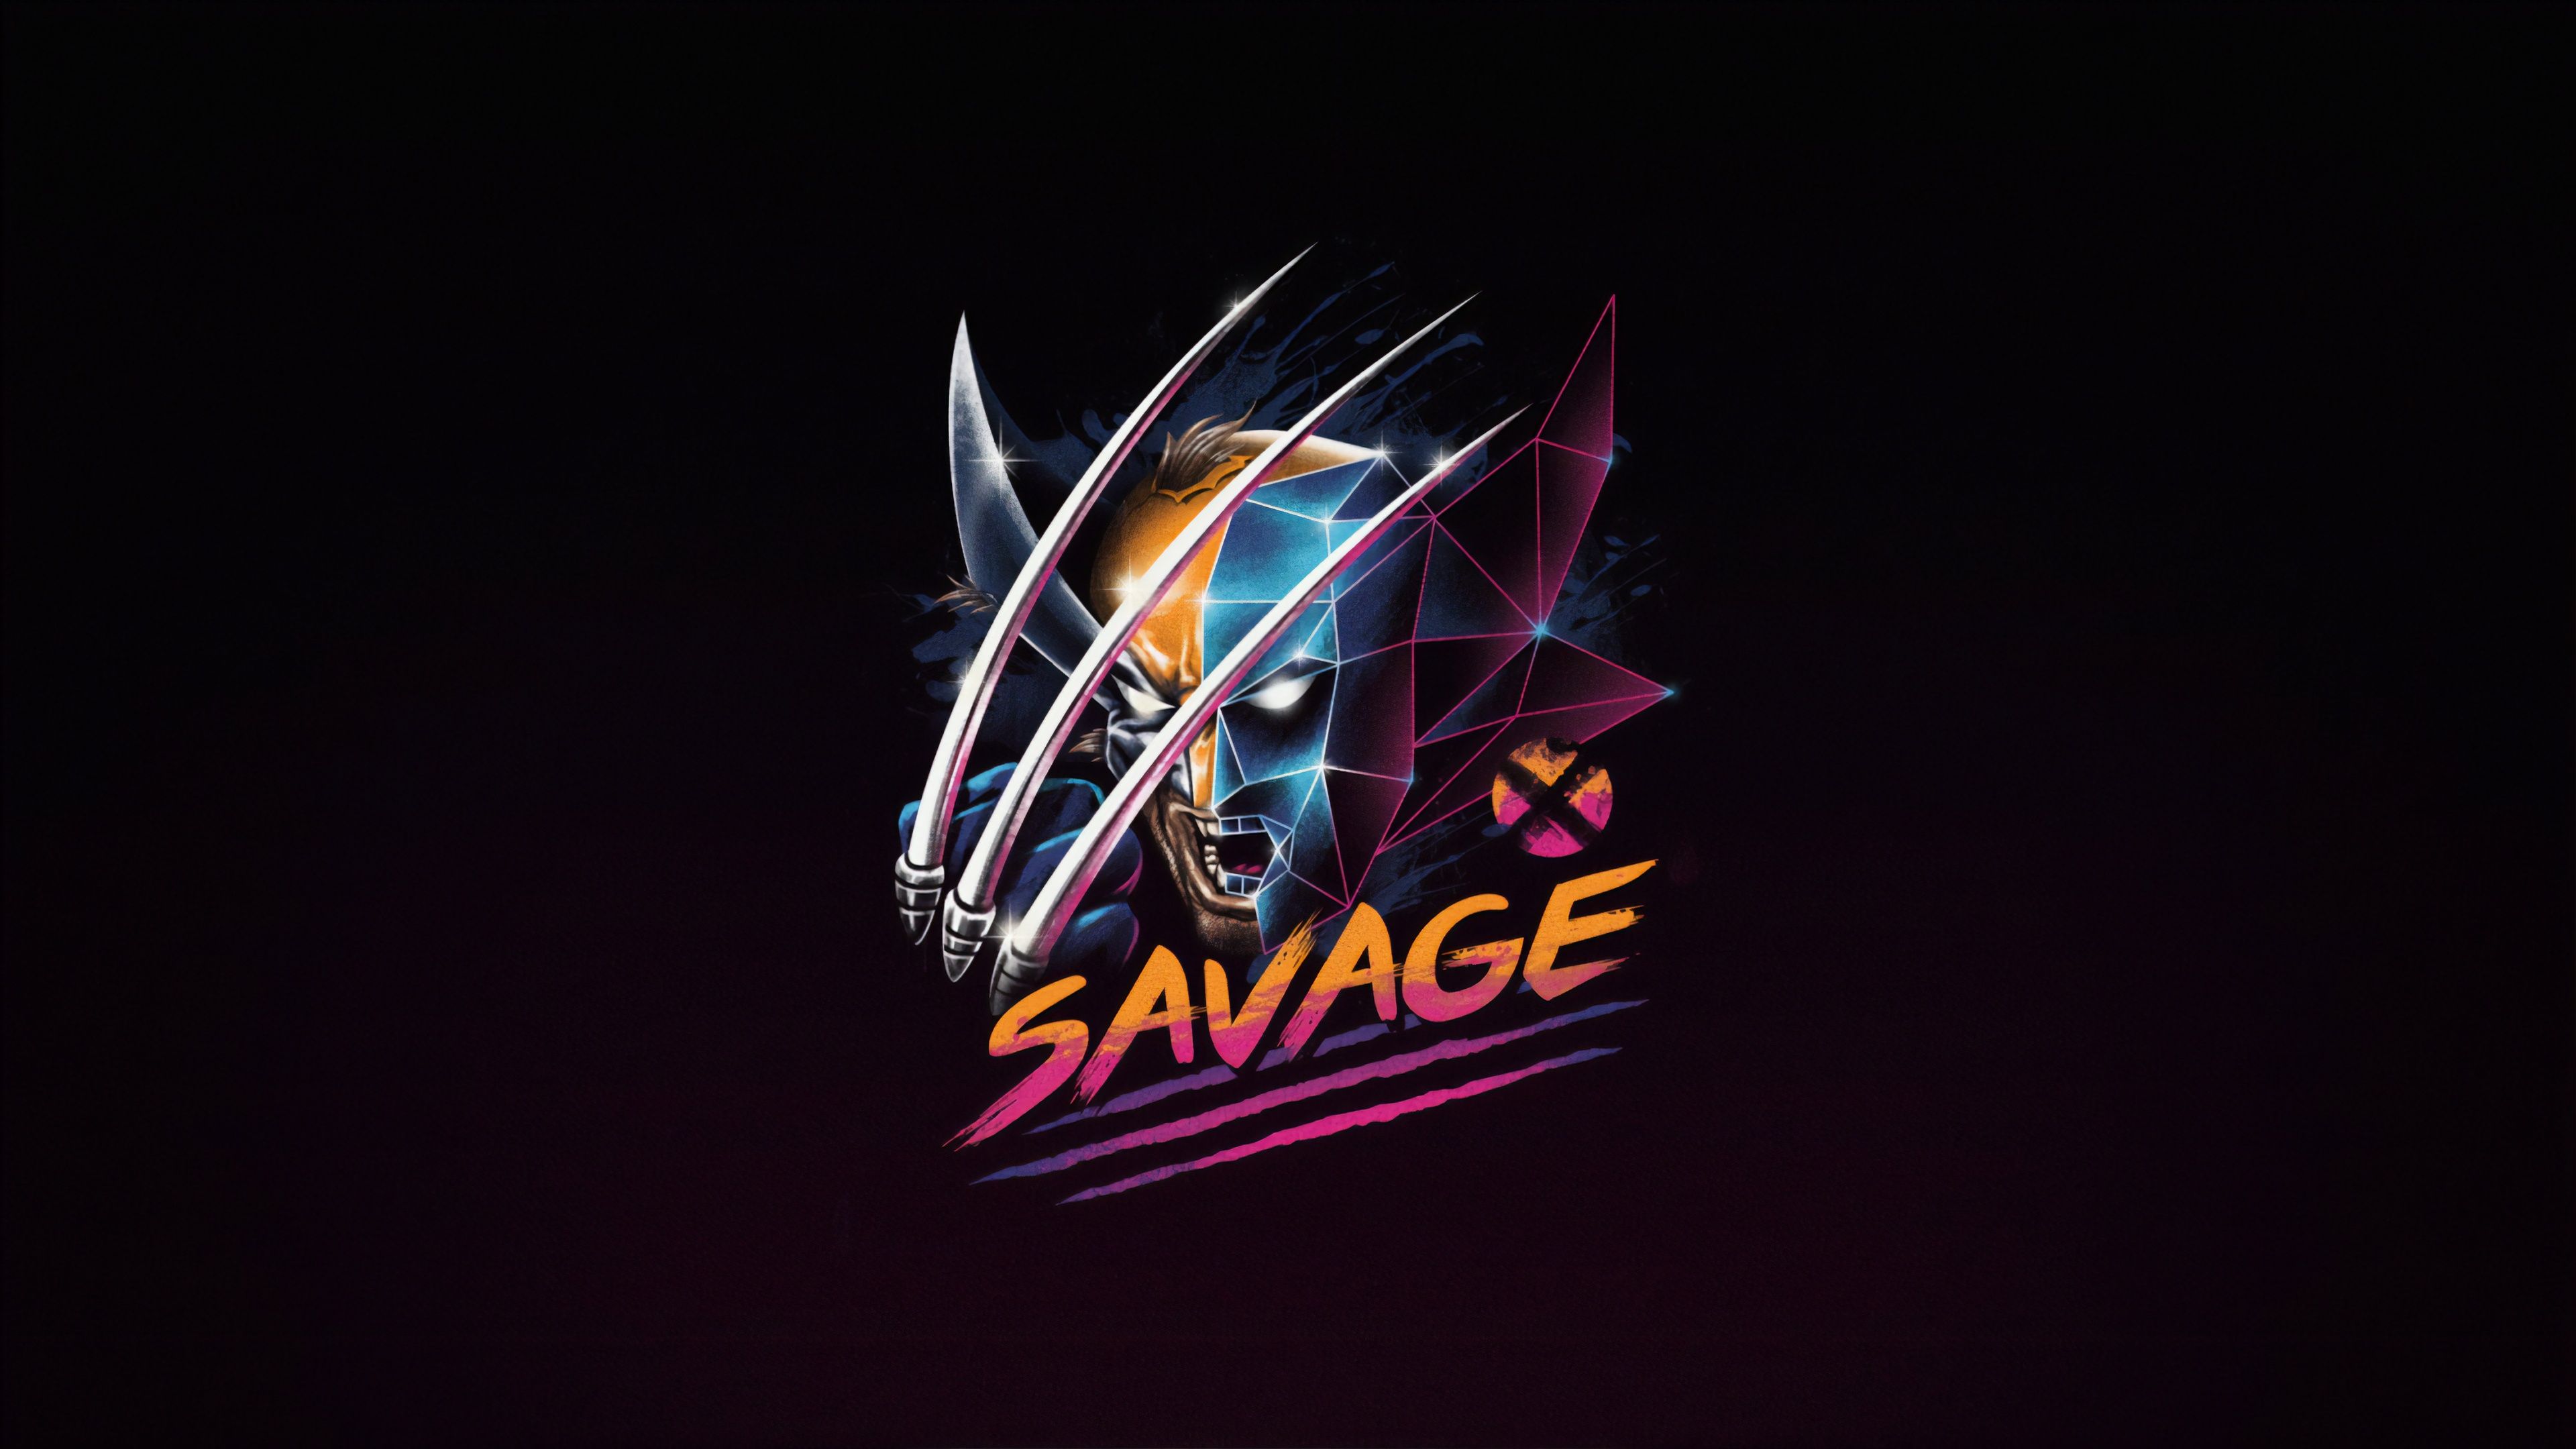 savage wallpaper, graphic design, logo, text, font, graphics, darkness, animation, brand, illustration, space